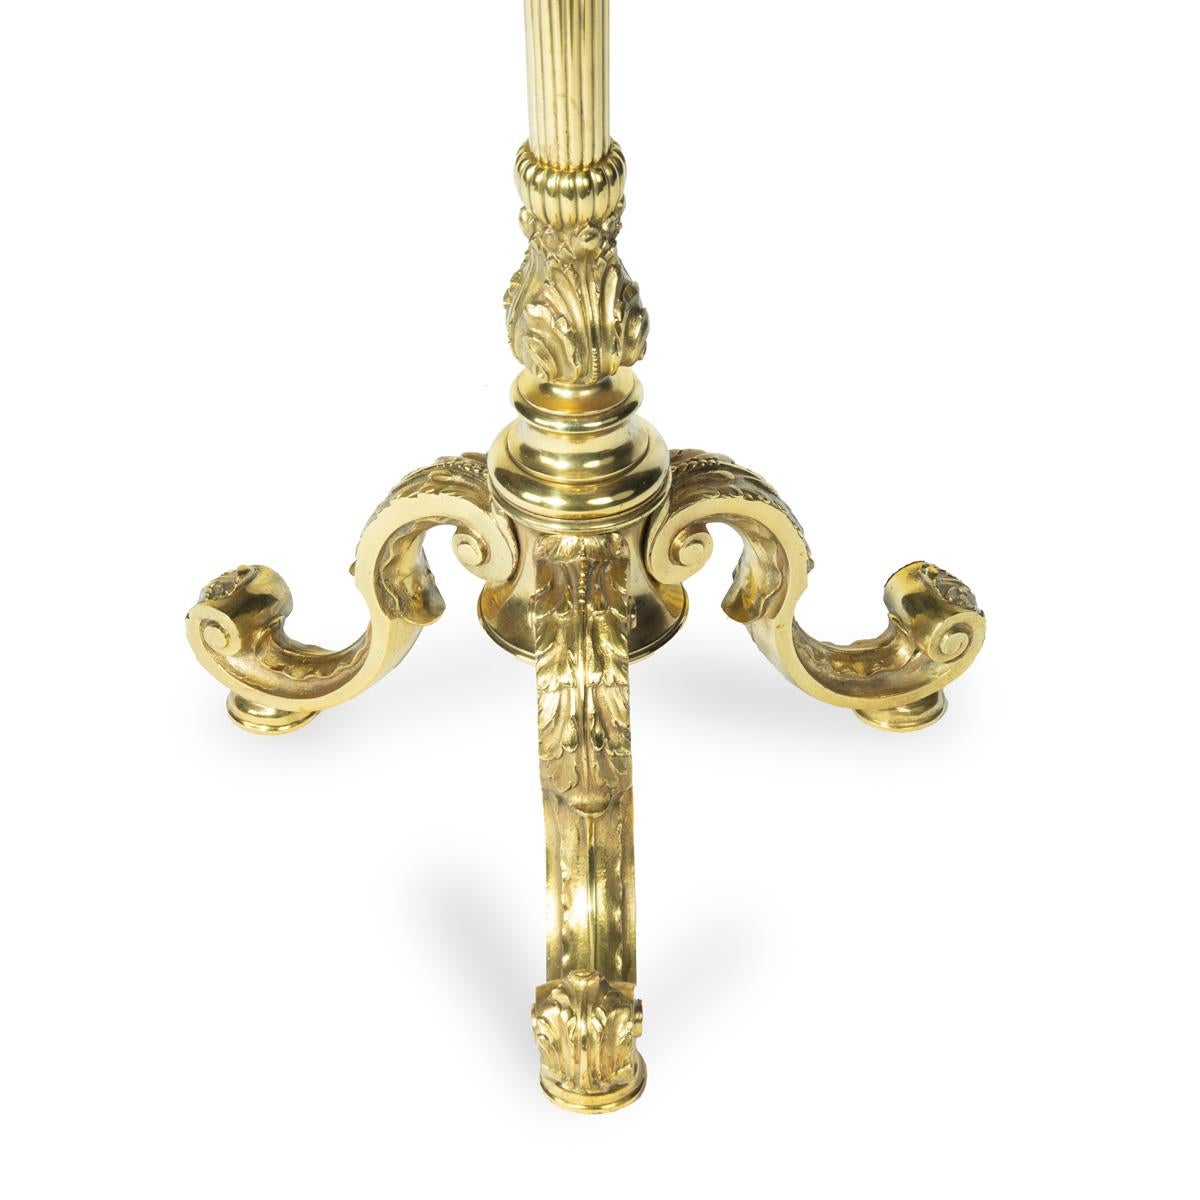 Brass A pair of particularly fine quality French solid brass standard lamps